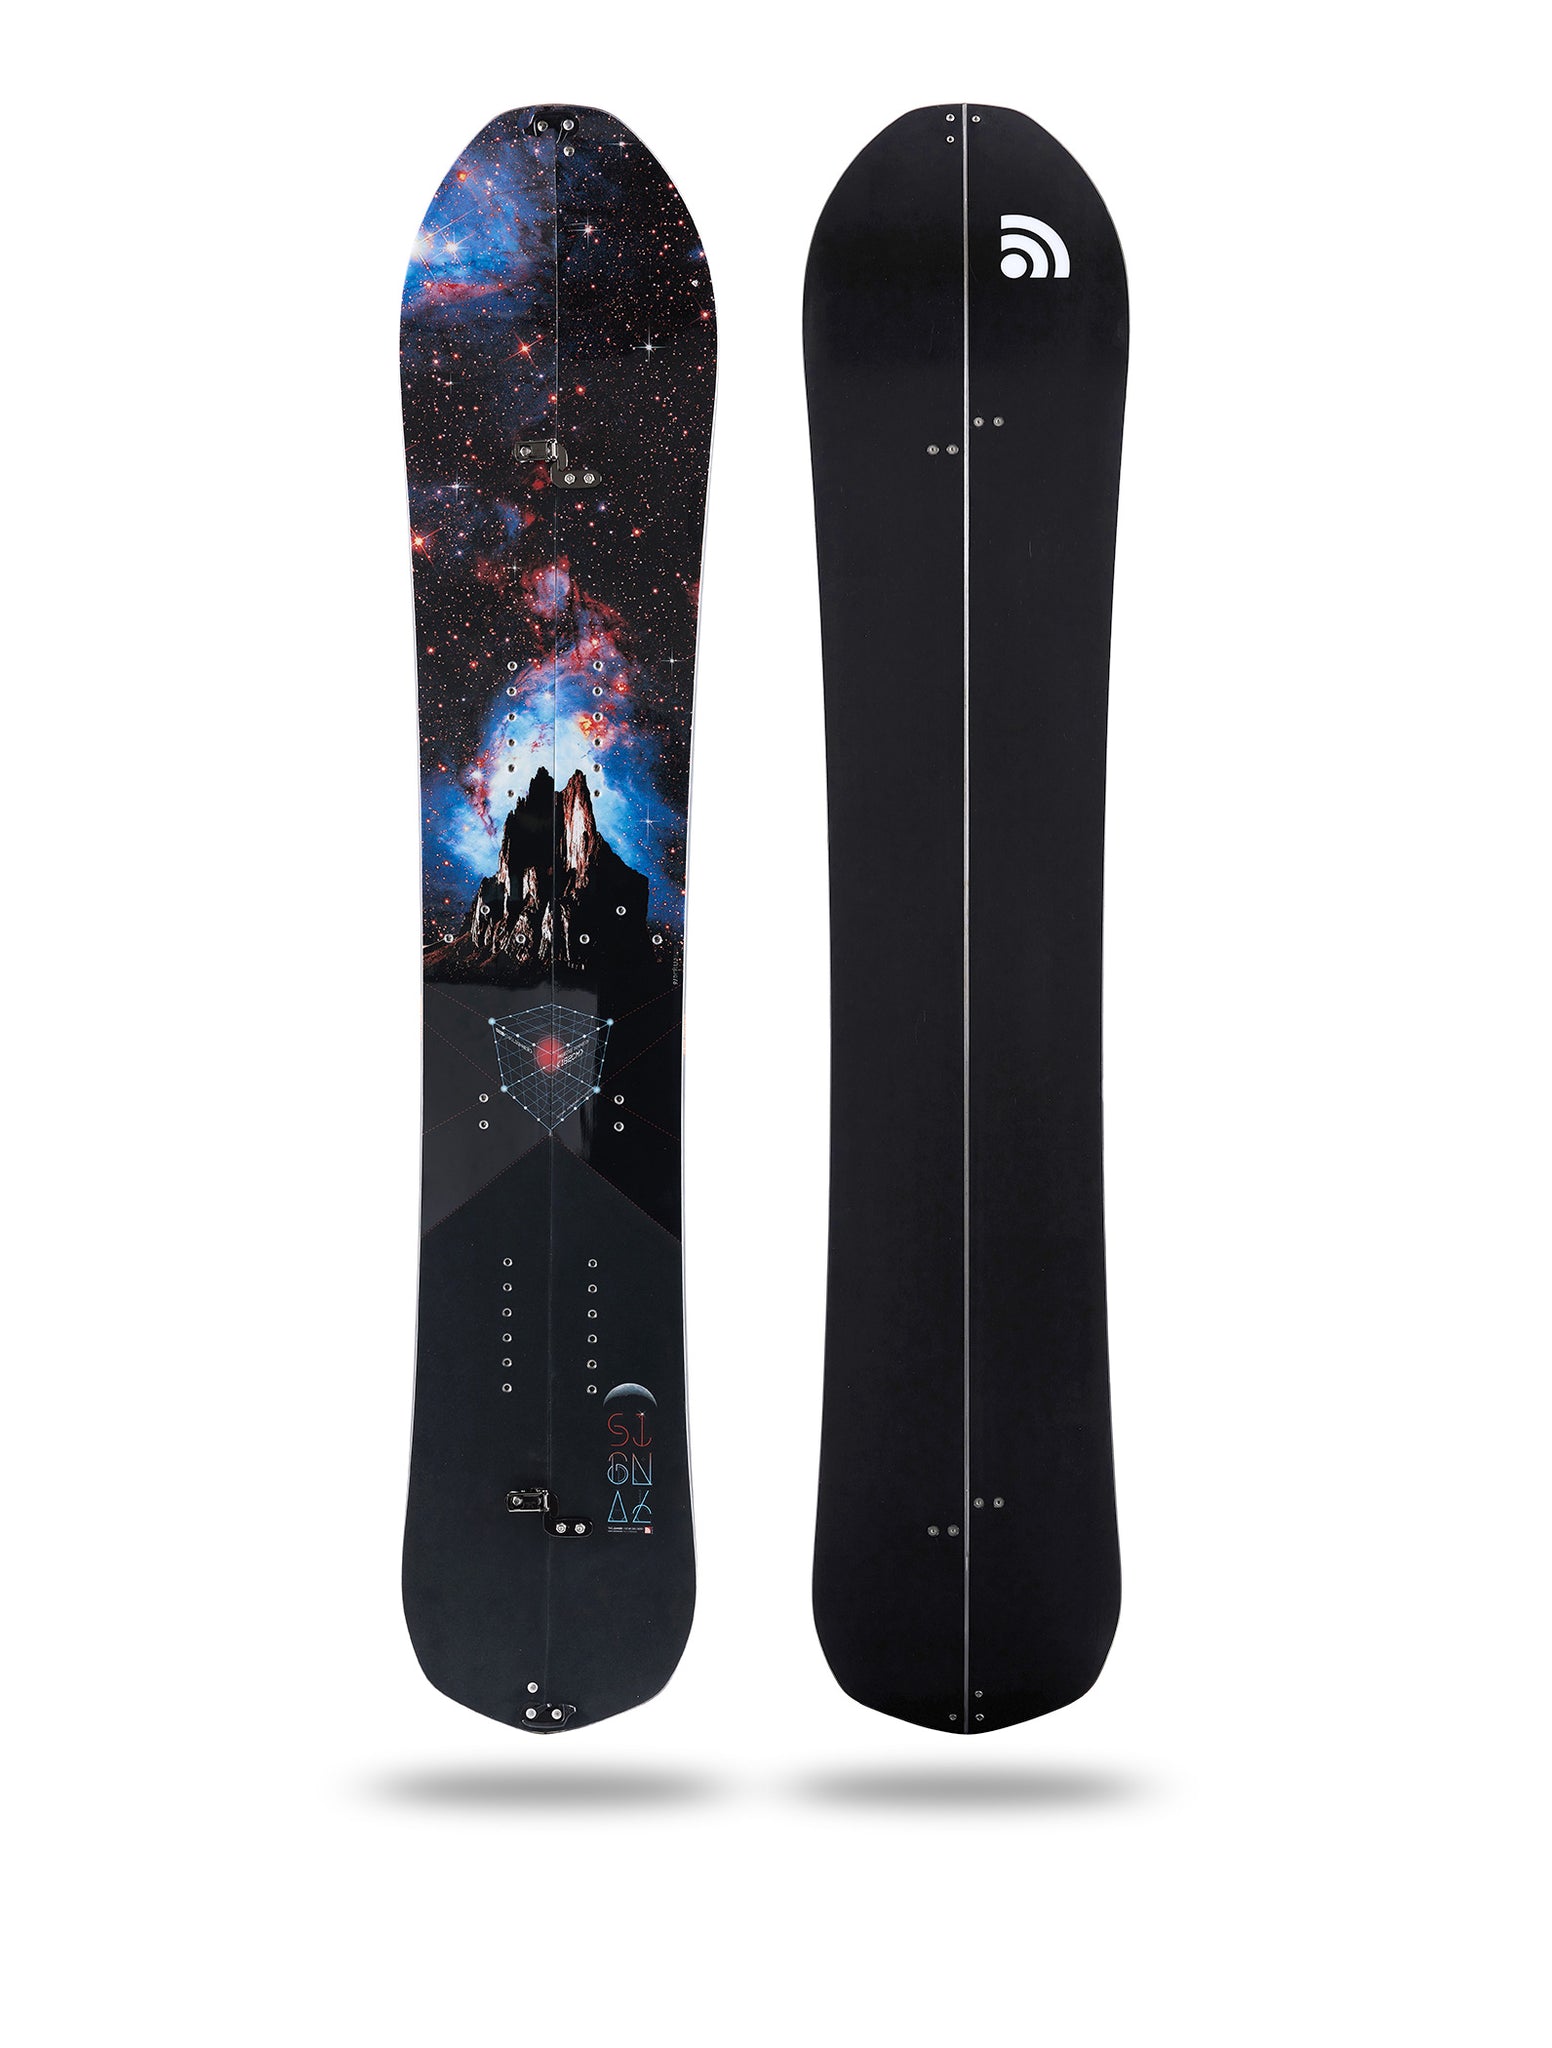 All Snowboards